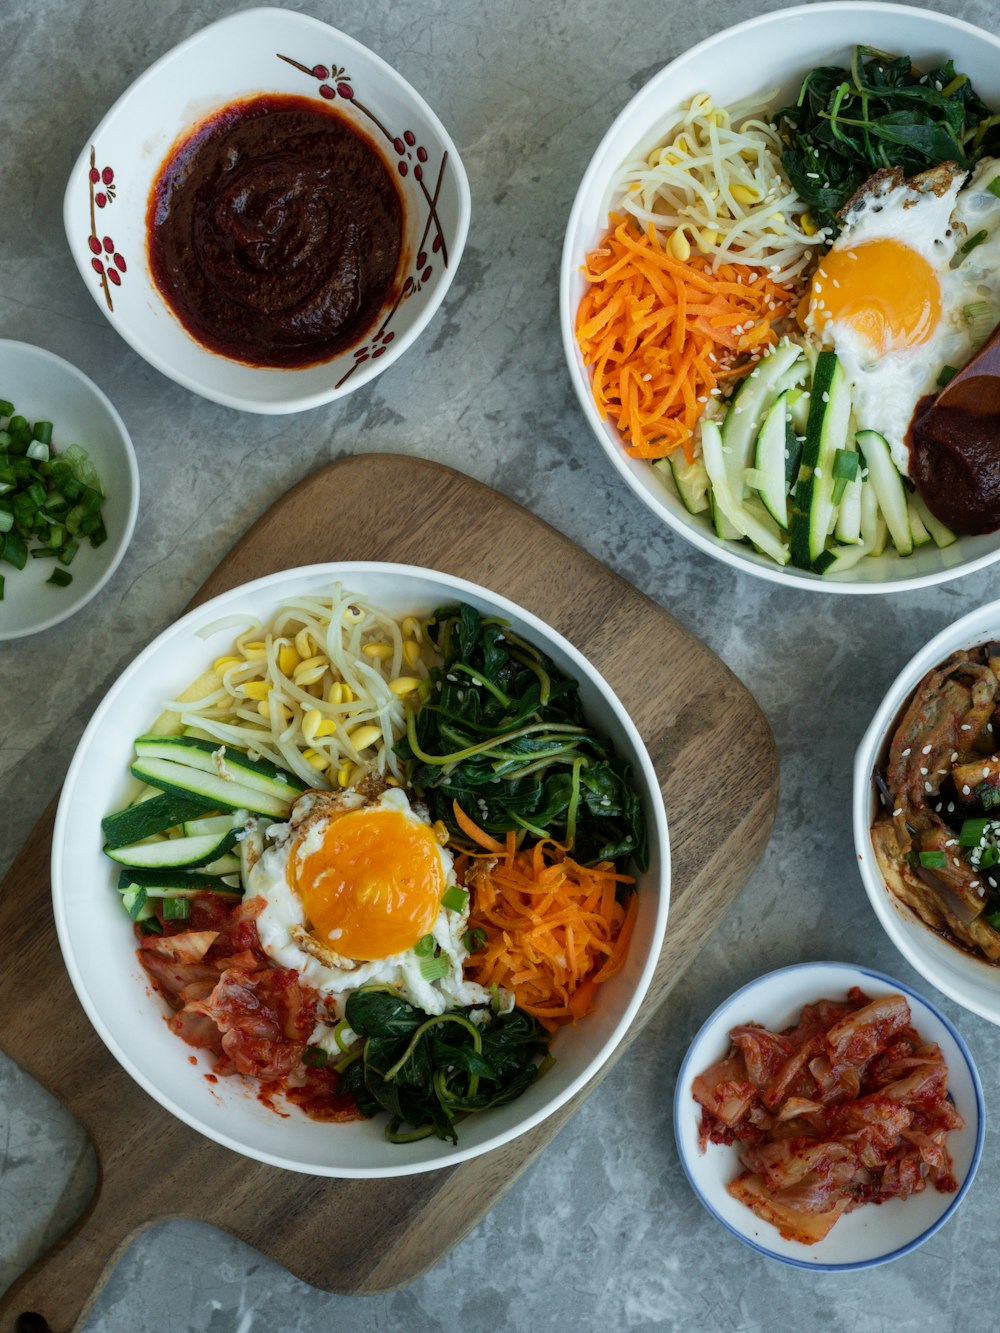 Korean Food Photos, Images and Pictures